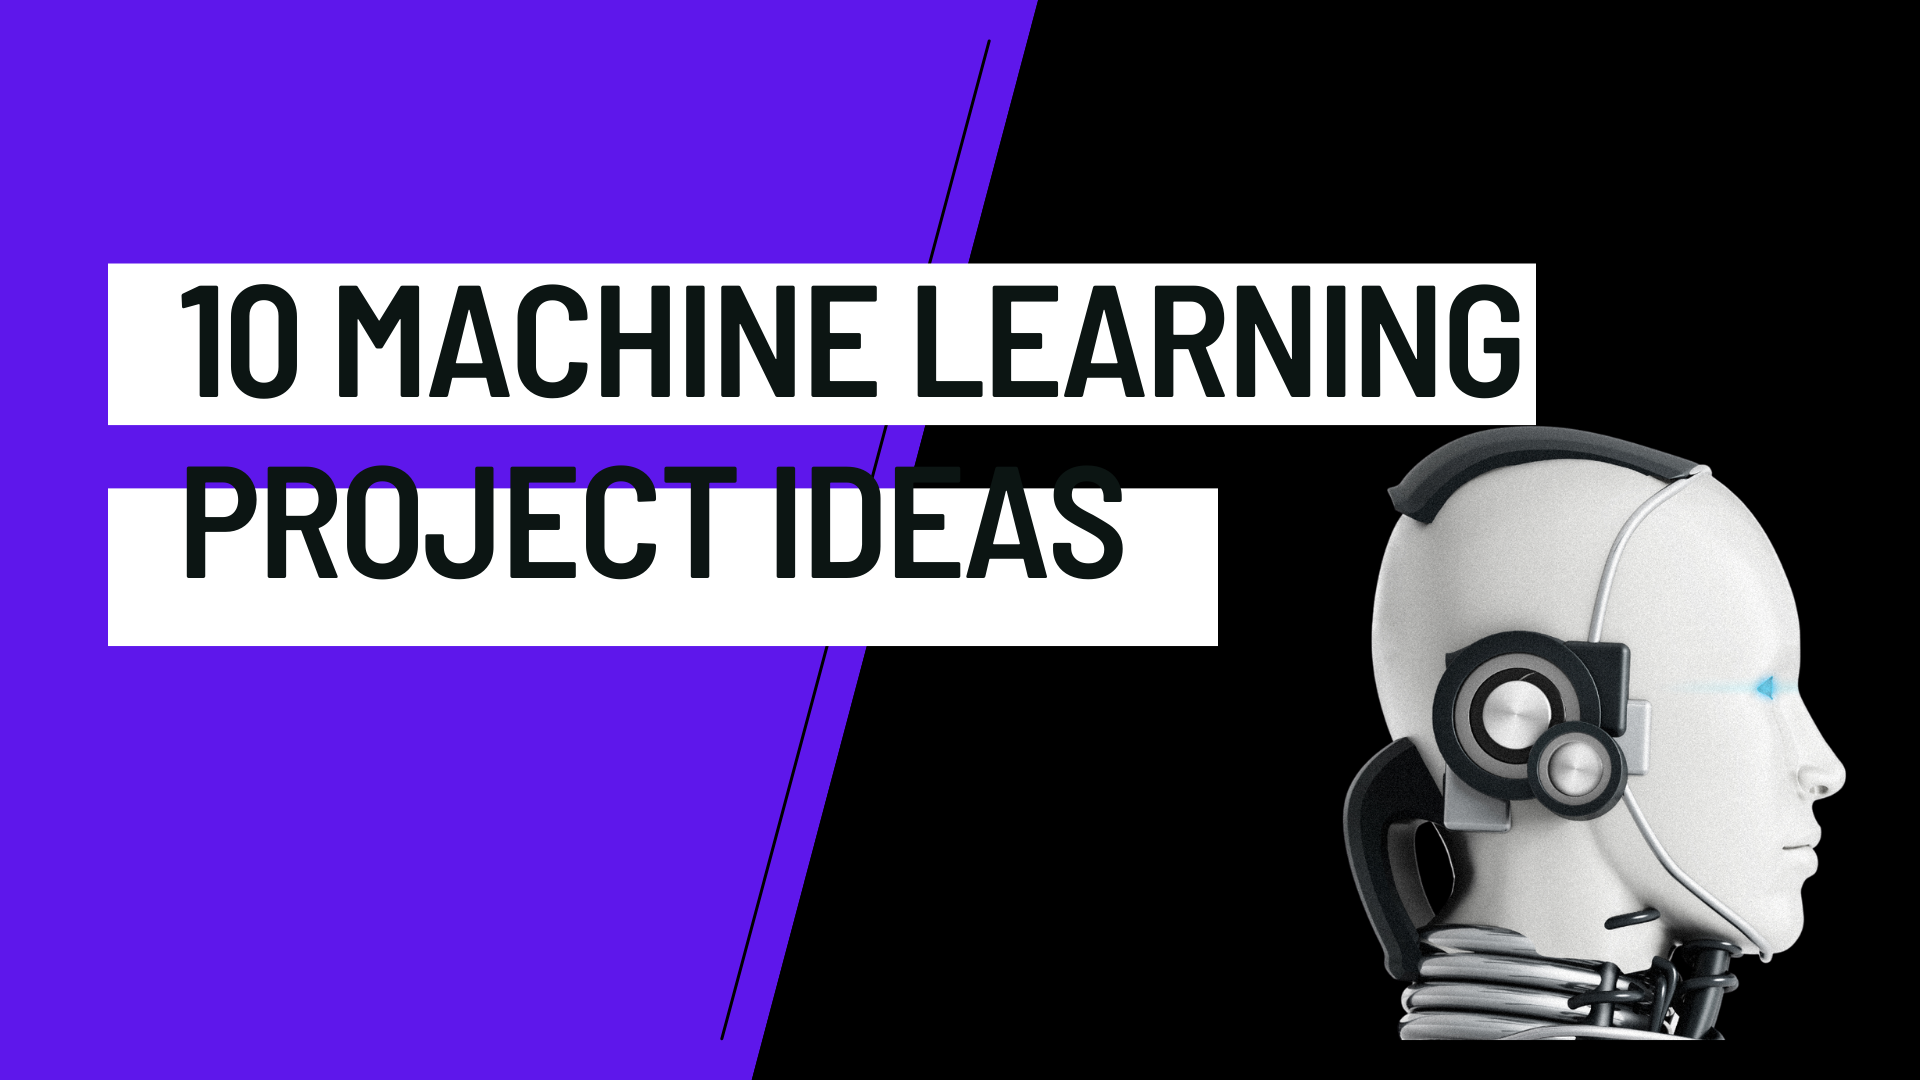 Top 10 Machine Learning Research Ideas 2022 - iLovePhD